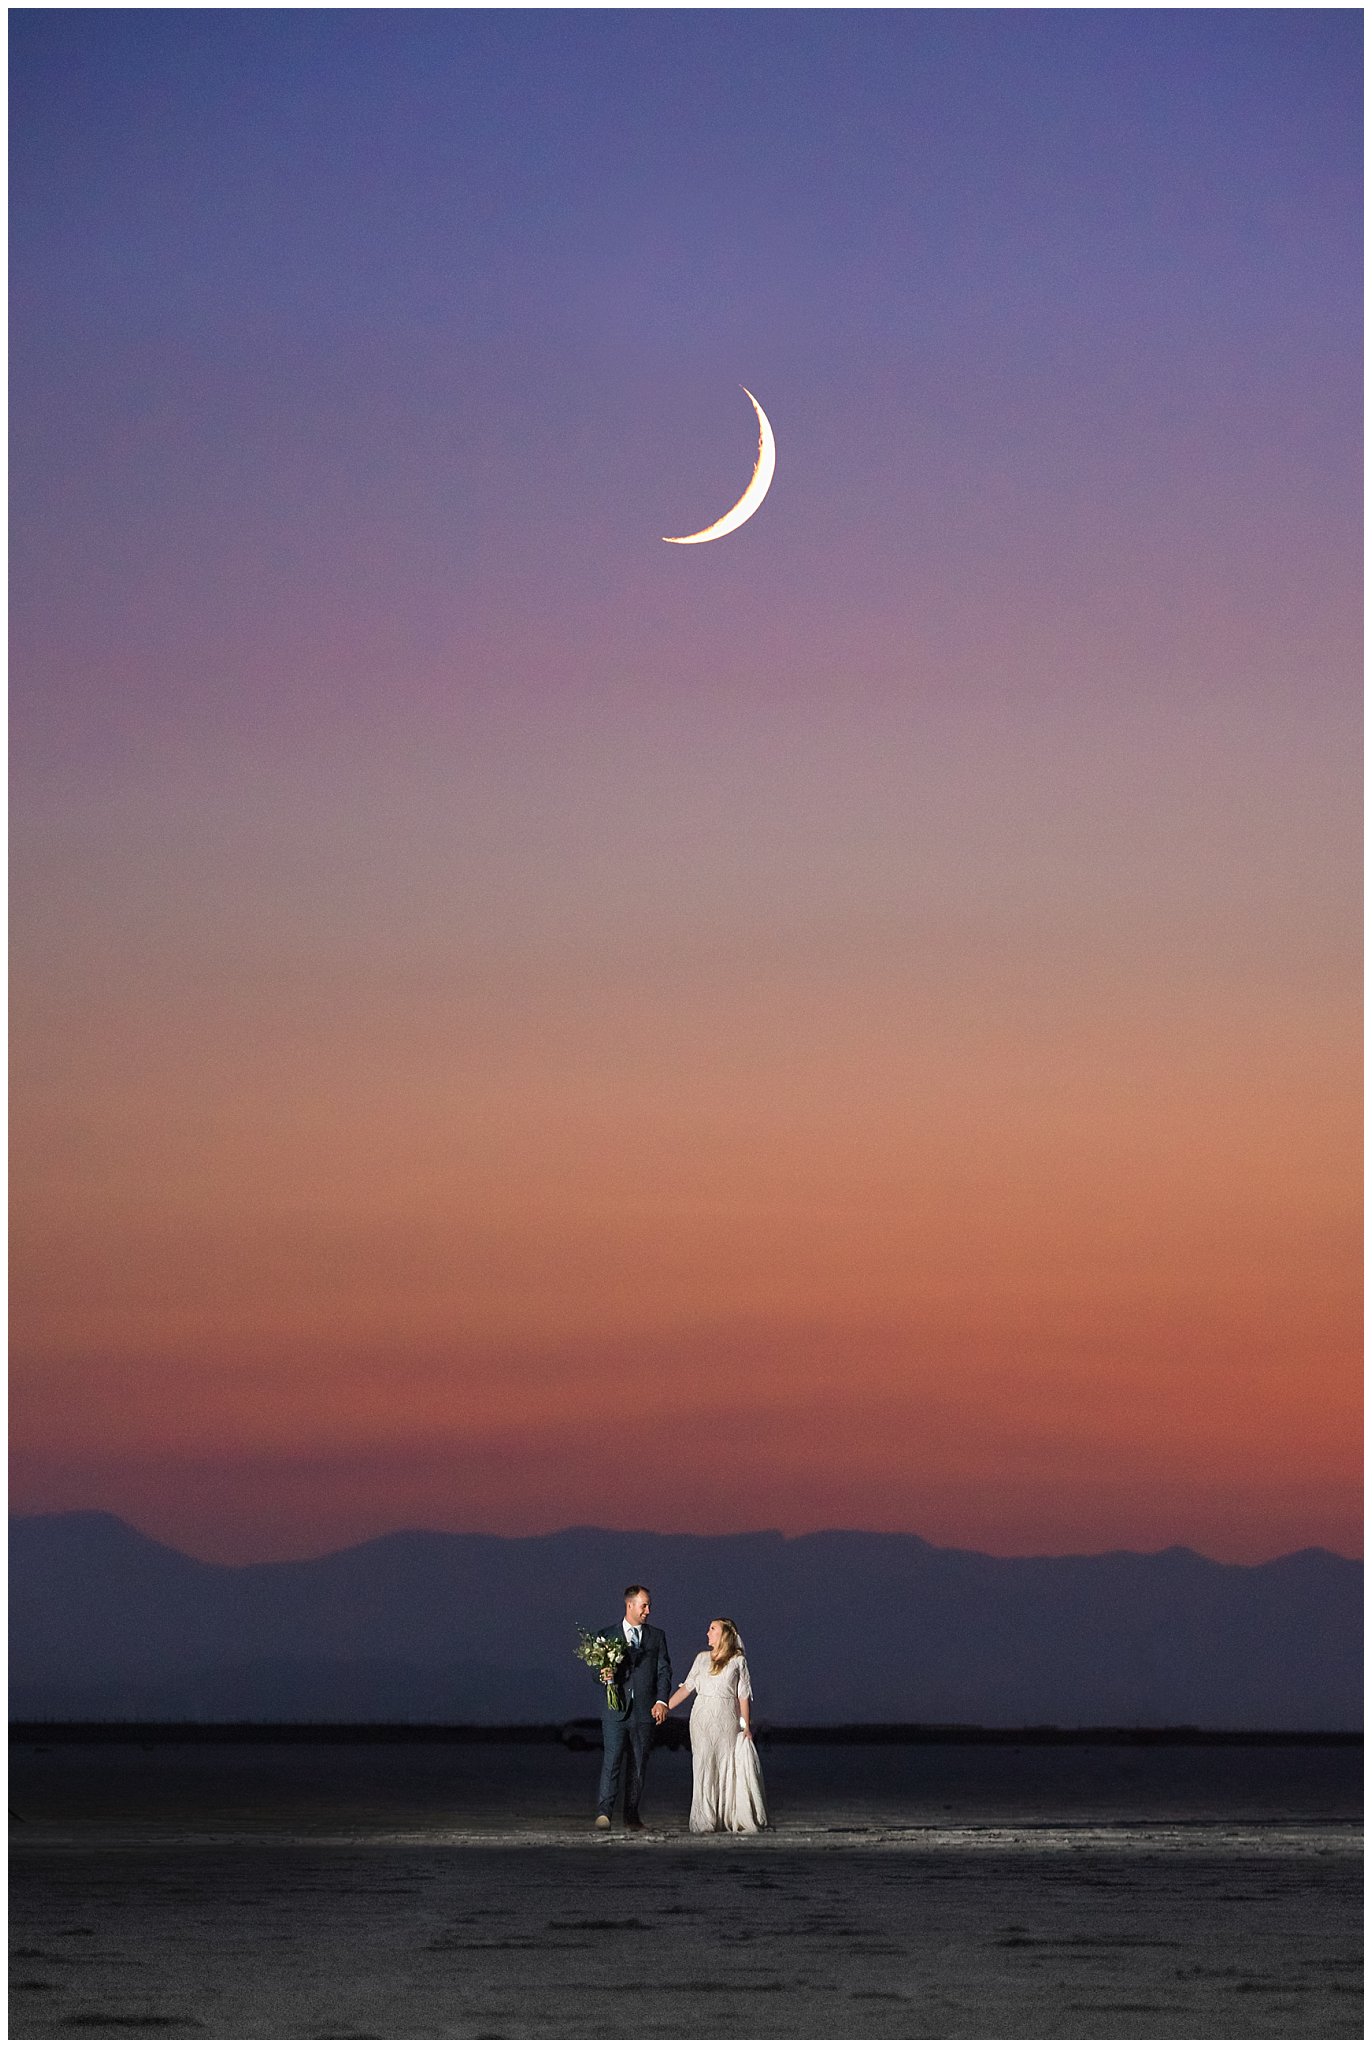 Sunset and Moon with bride and groom on the salt flats epic adventure wedding | Bonneville Salt Flats Sunset Wedding Formal Session | Jessie and Dallin Photography